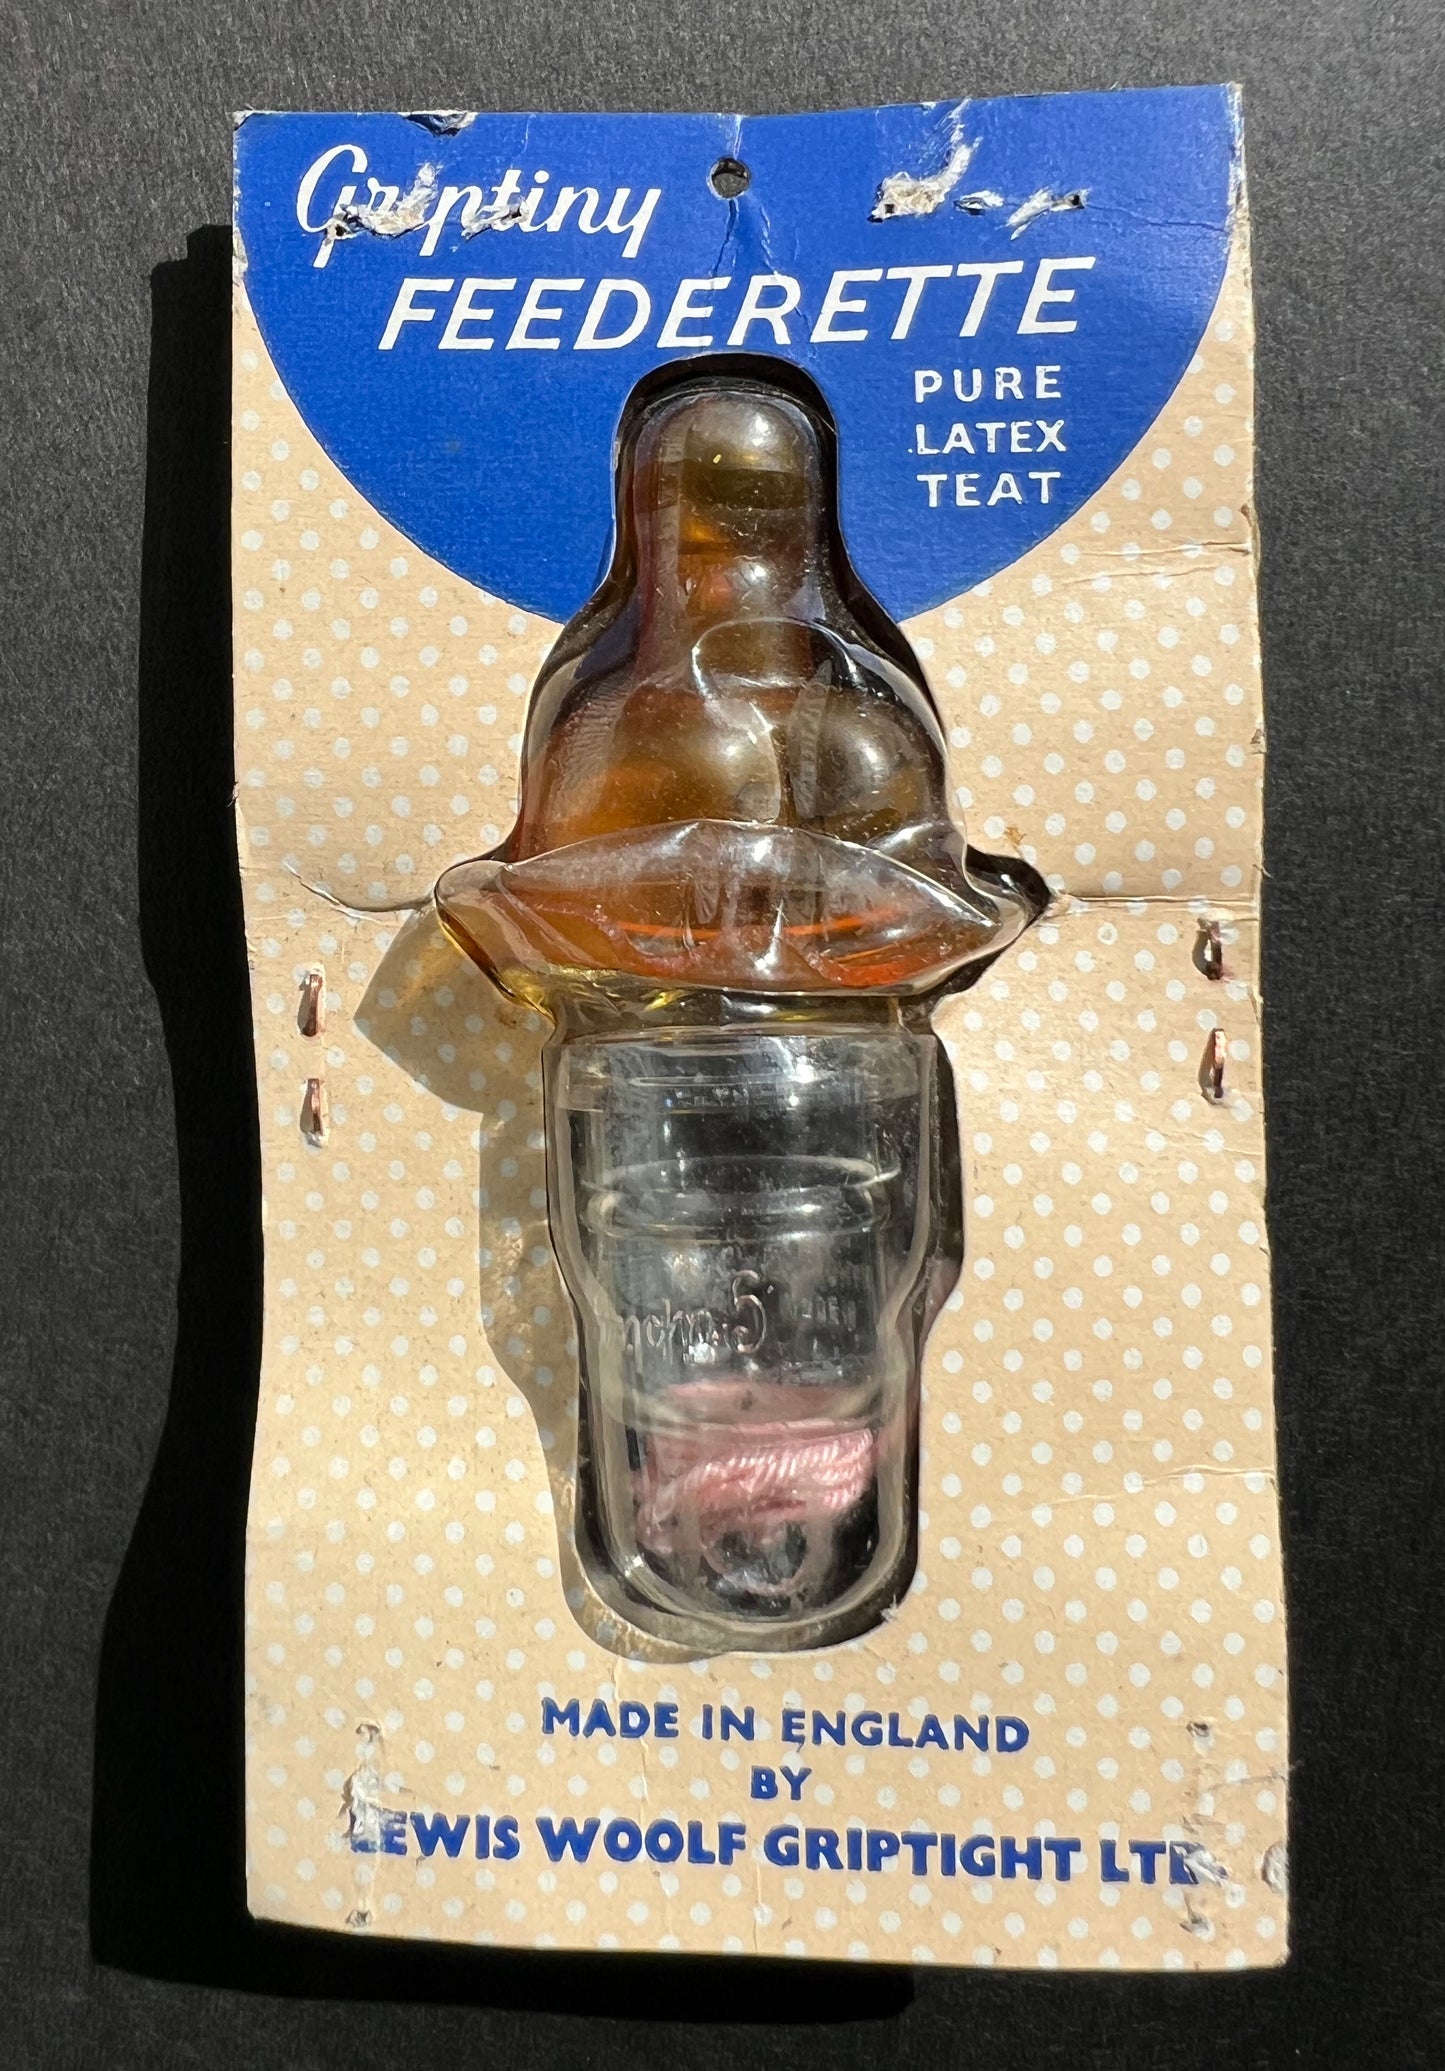 Packaged Latex Teat and Tiny Feeder Bottle.